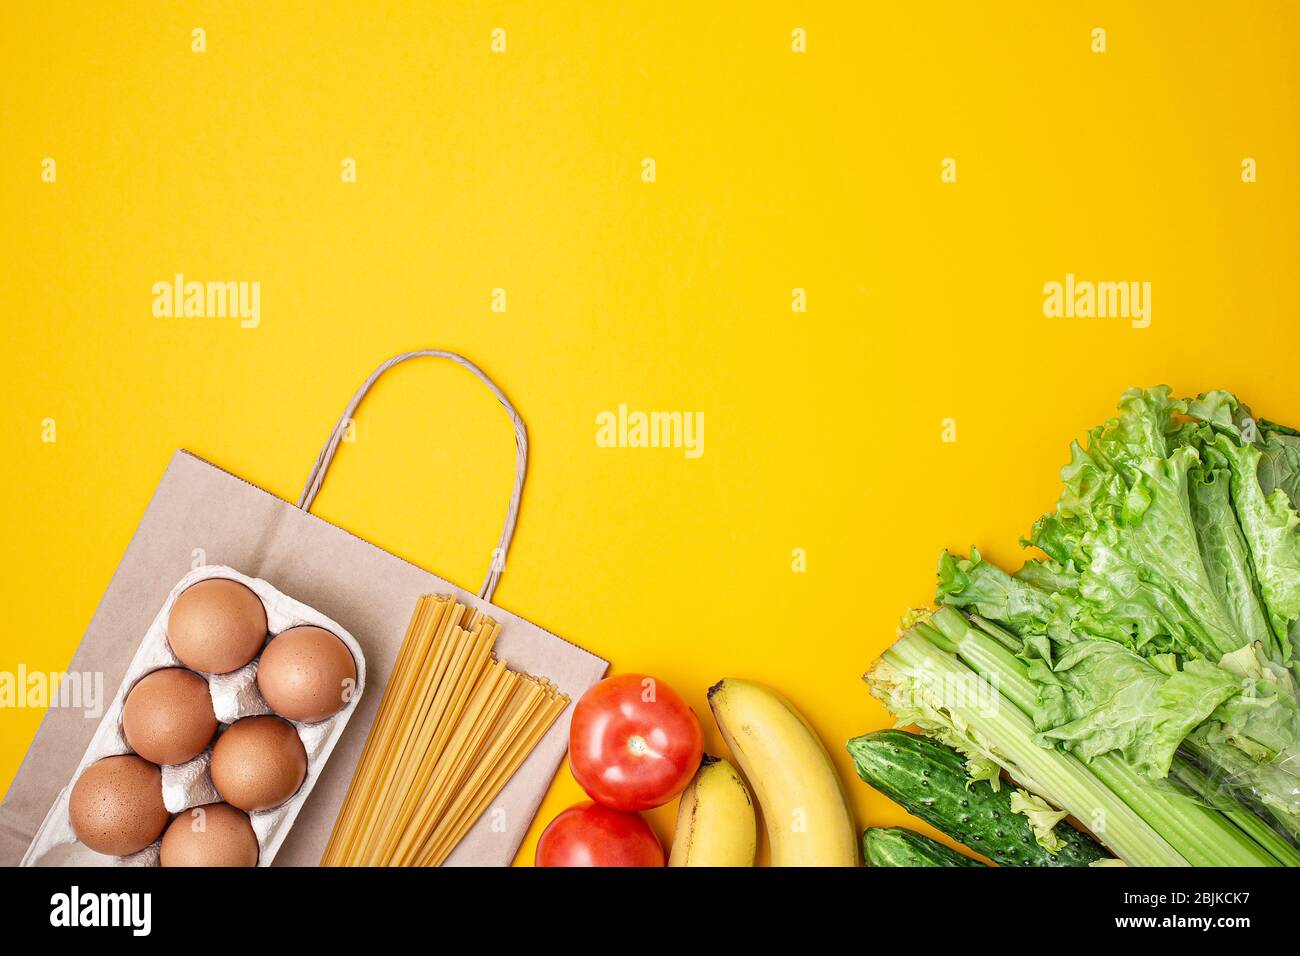 Paper bag with food, canned food, tomatoes, cucumbers, bananas on a yellow background. Donation, coronavirus quarantine. Food supplies for quarantine. Stock Photo